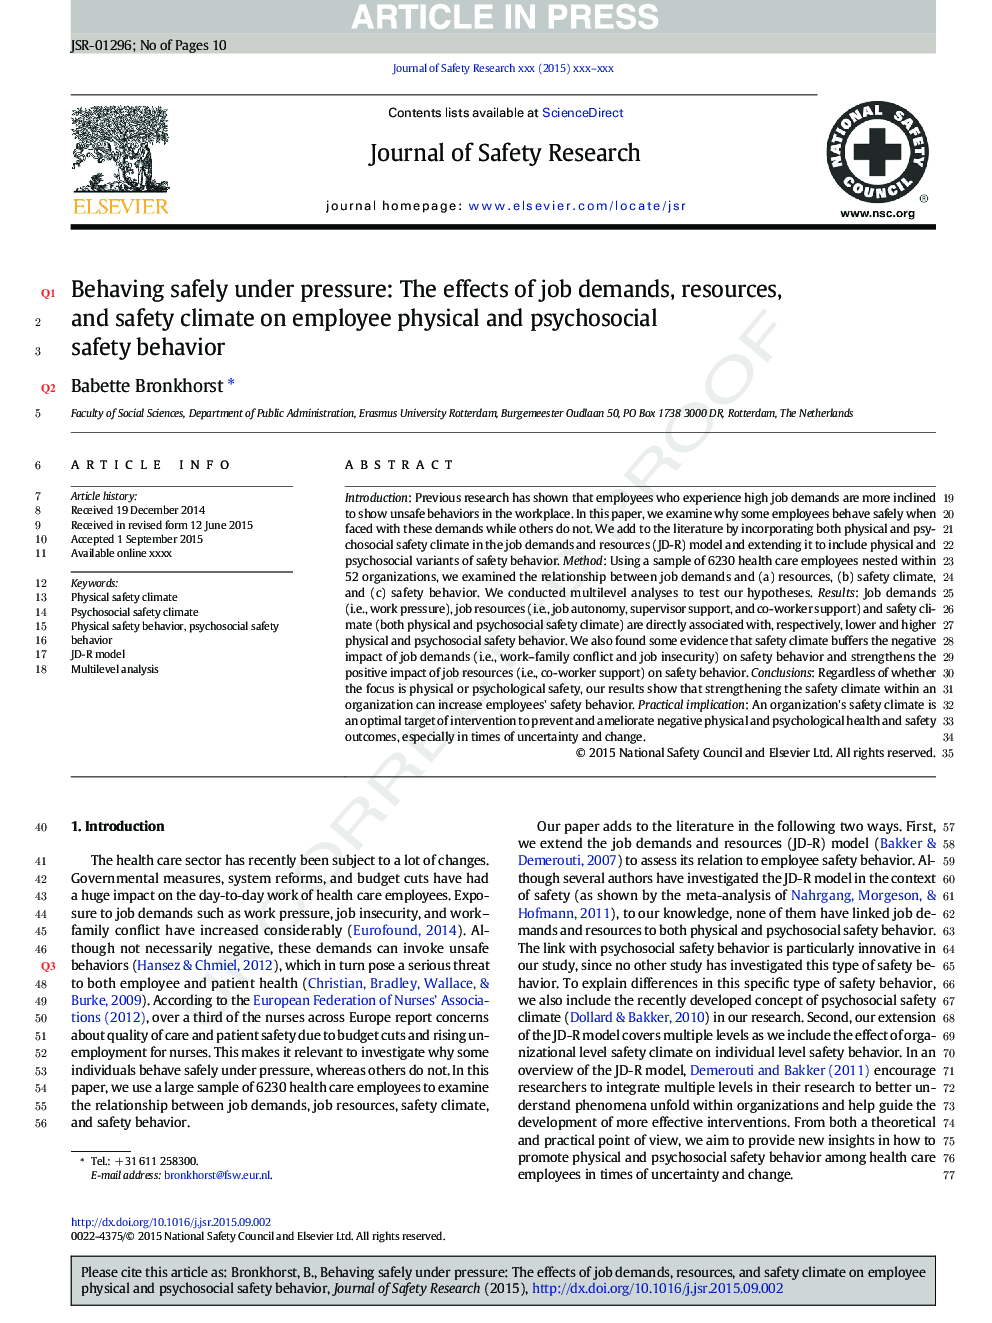 Behaving safely under pressure: The effects of job demands, resources, and safety climate on employee physical and psychosocial safety behavior